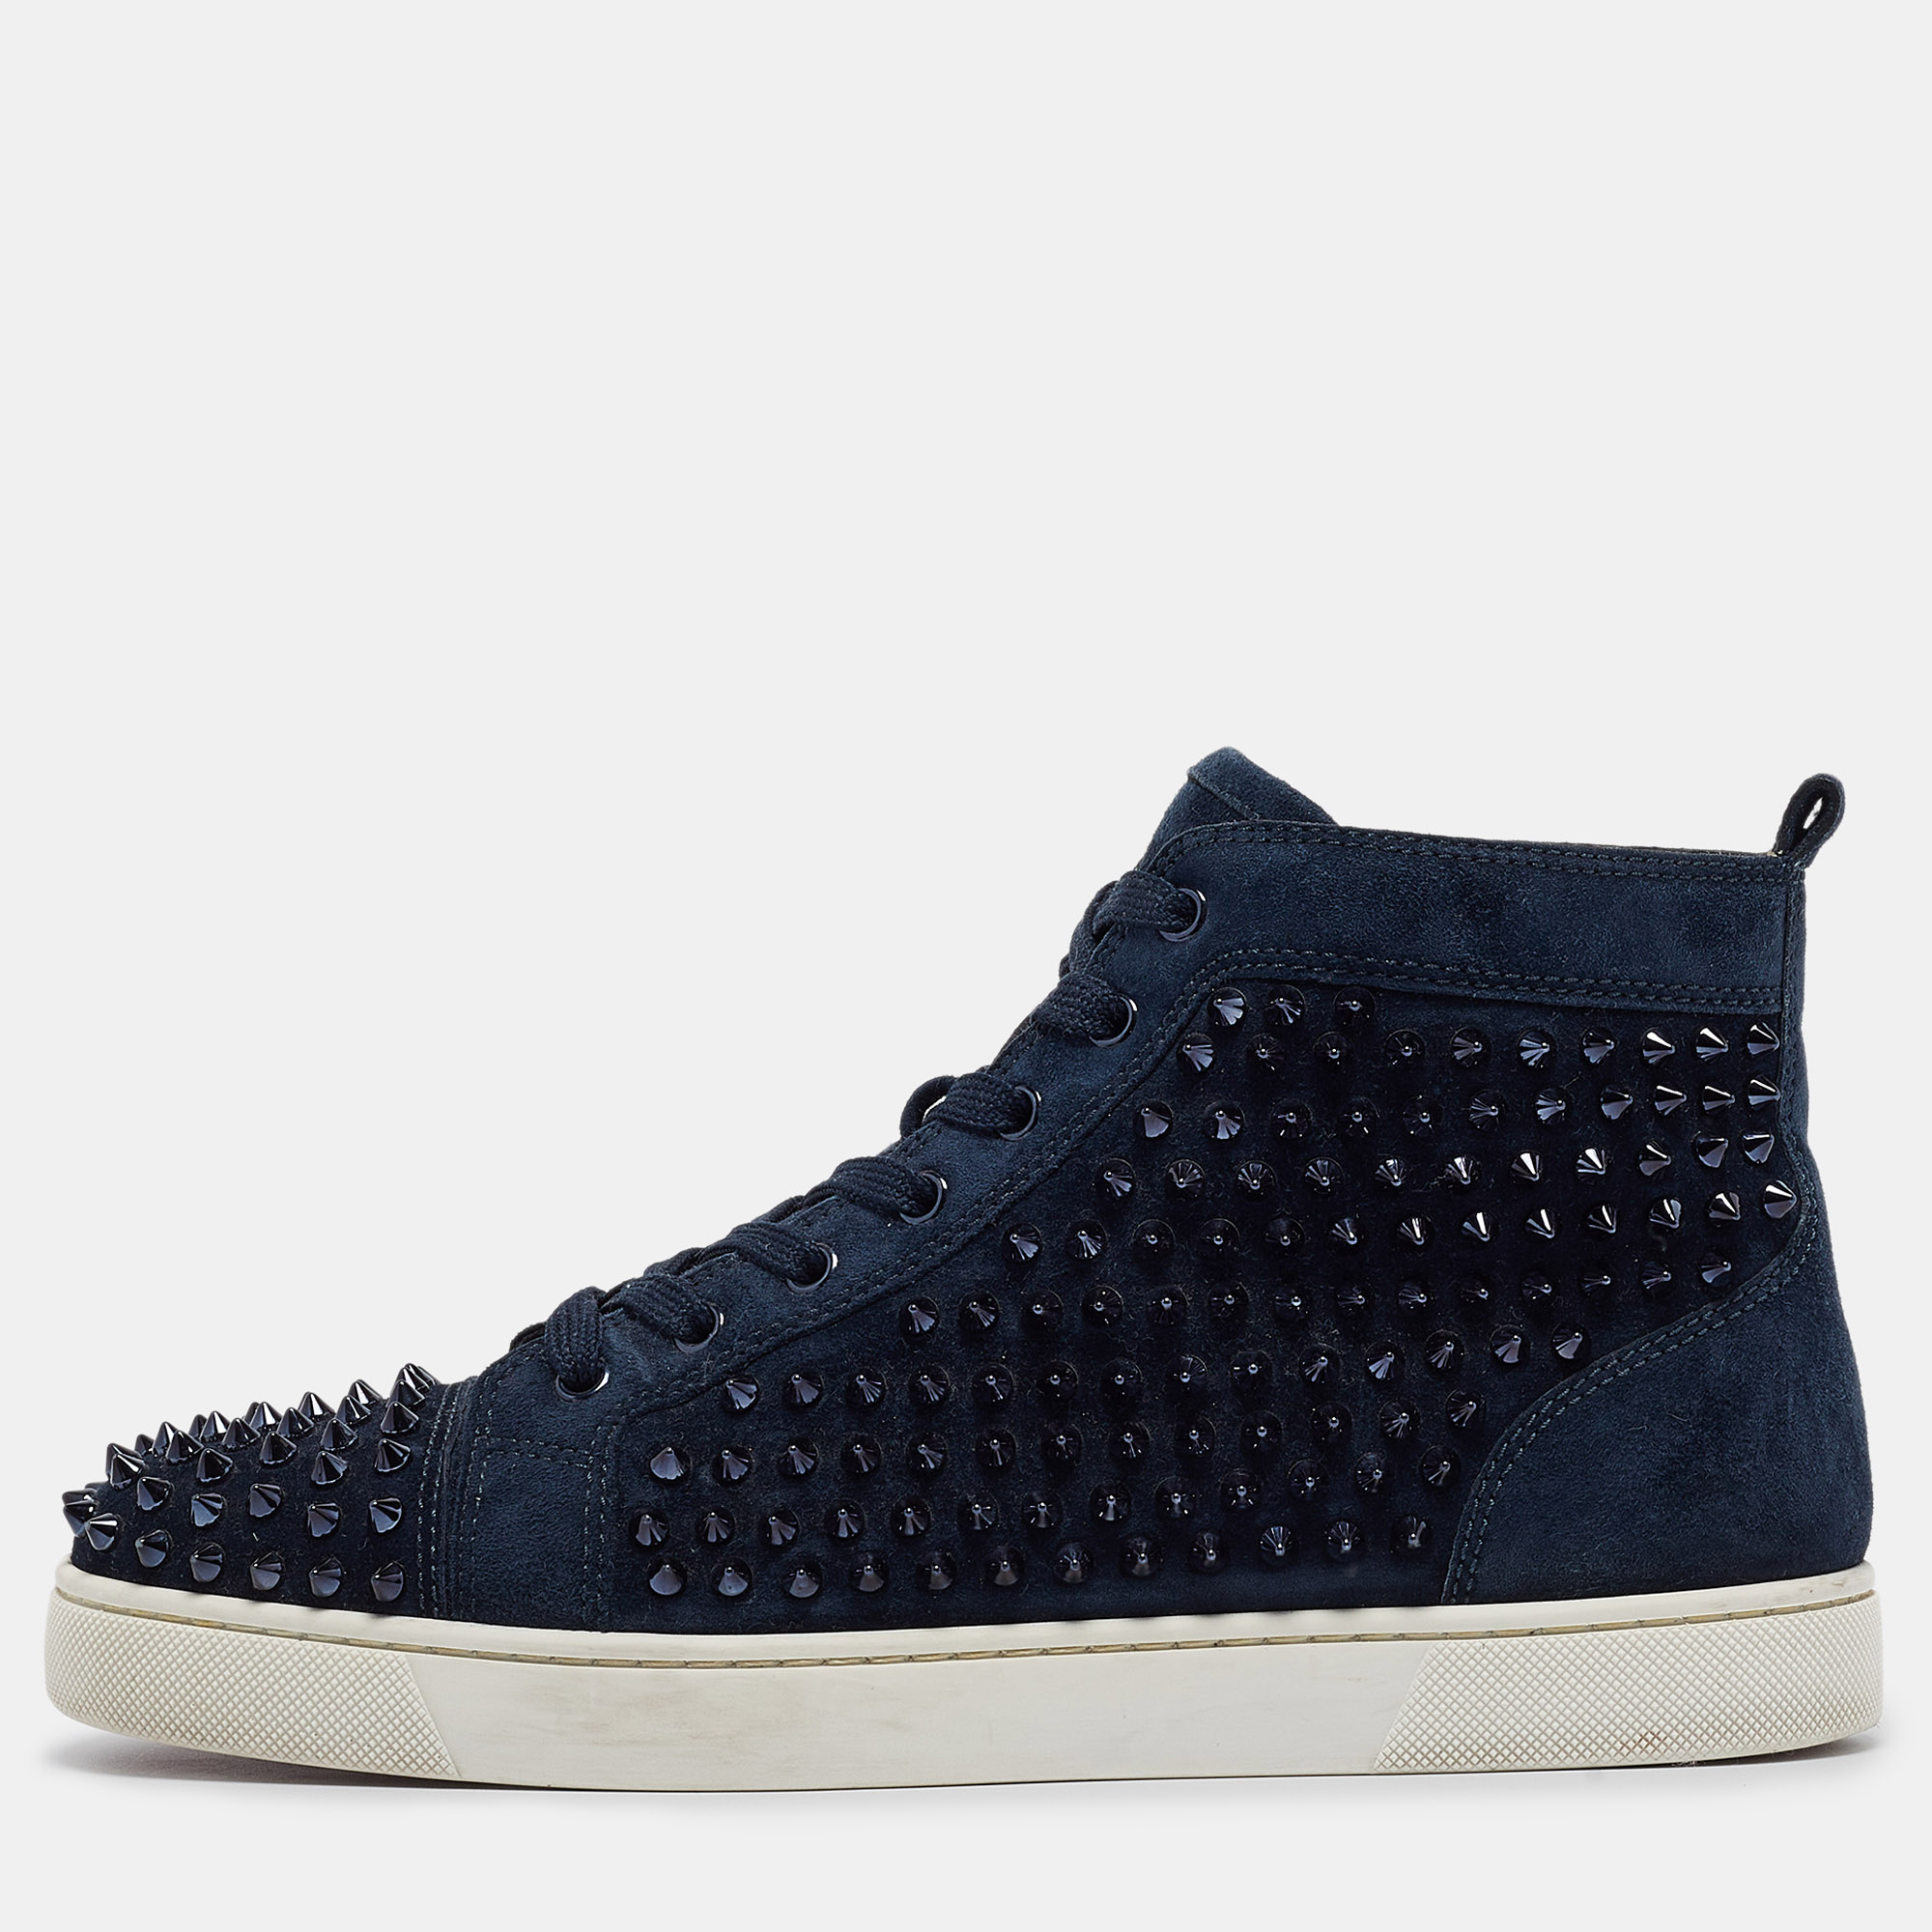 Christian louboutin dark blue suede louis spikes sneakers size 42.5